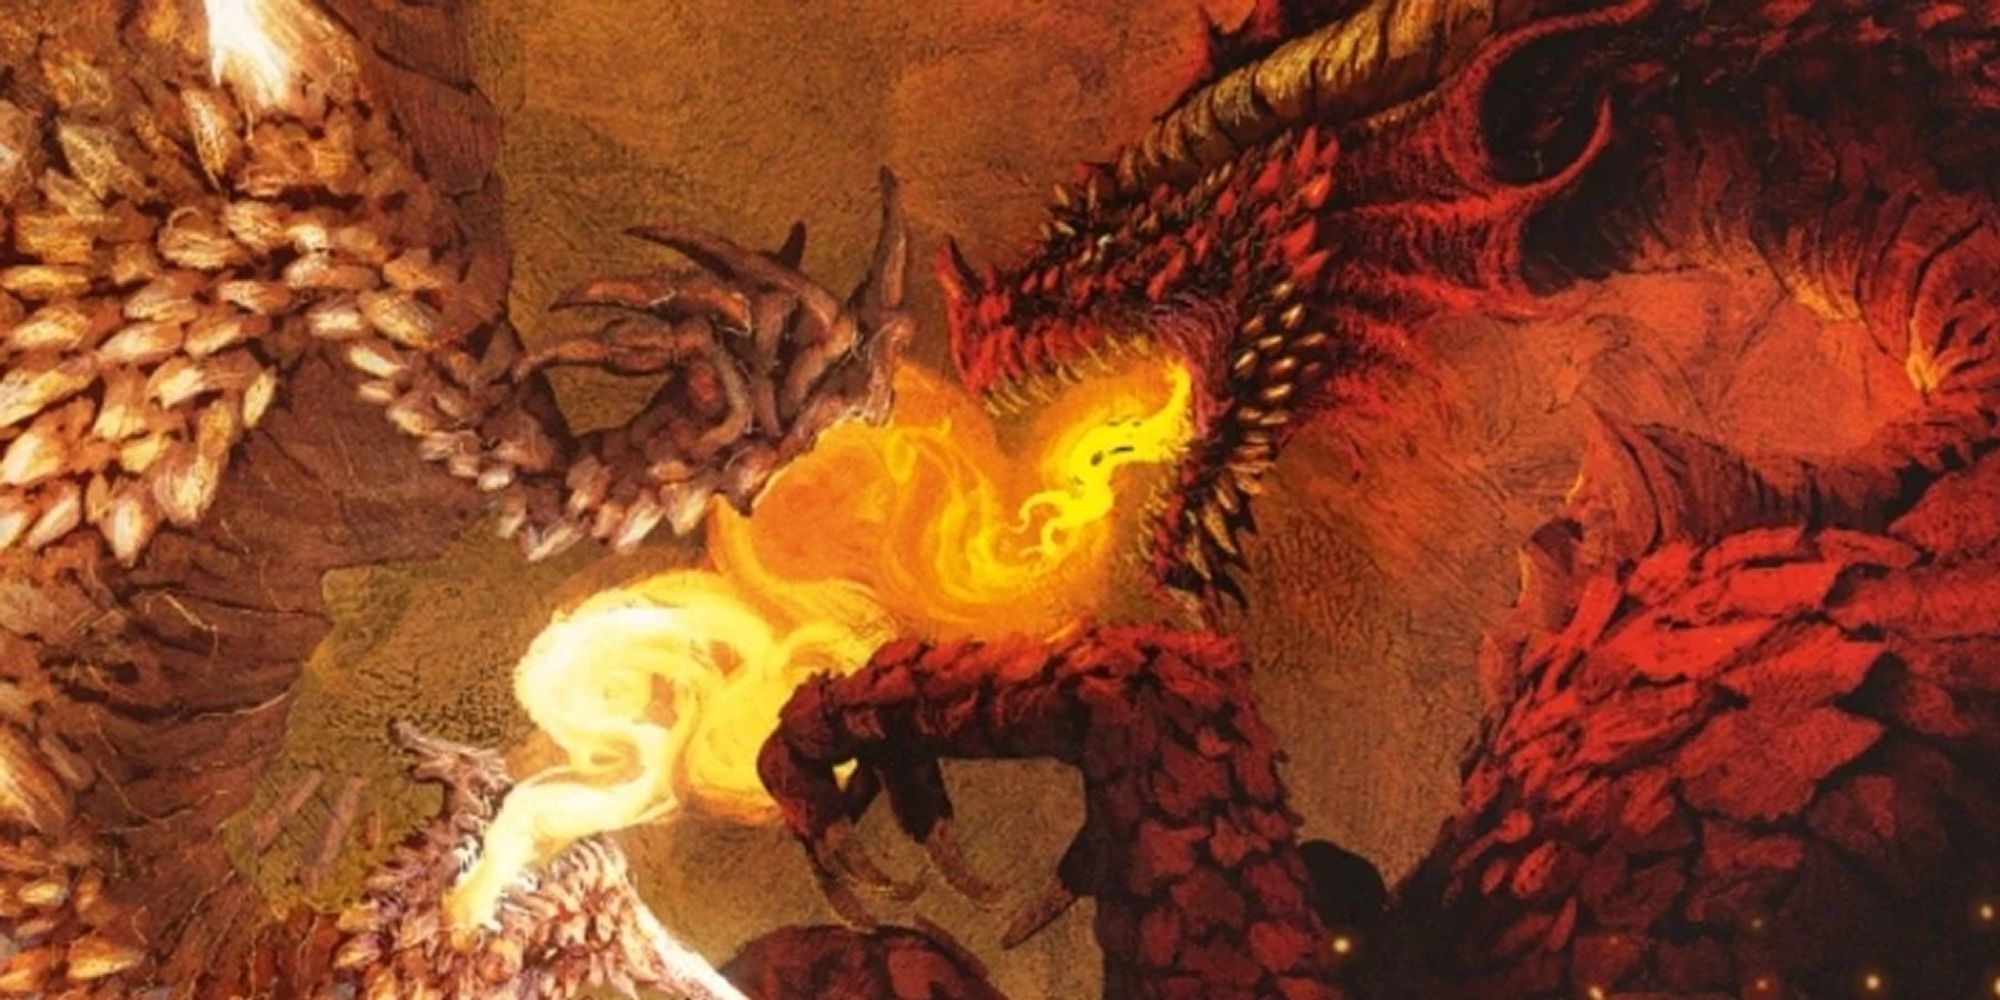 D&D Dragons Fighting And Breathing Fire